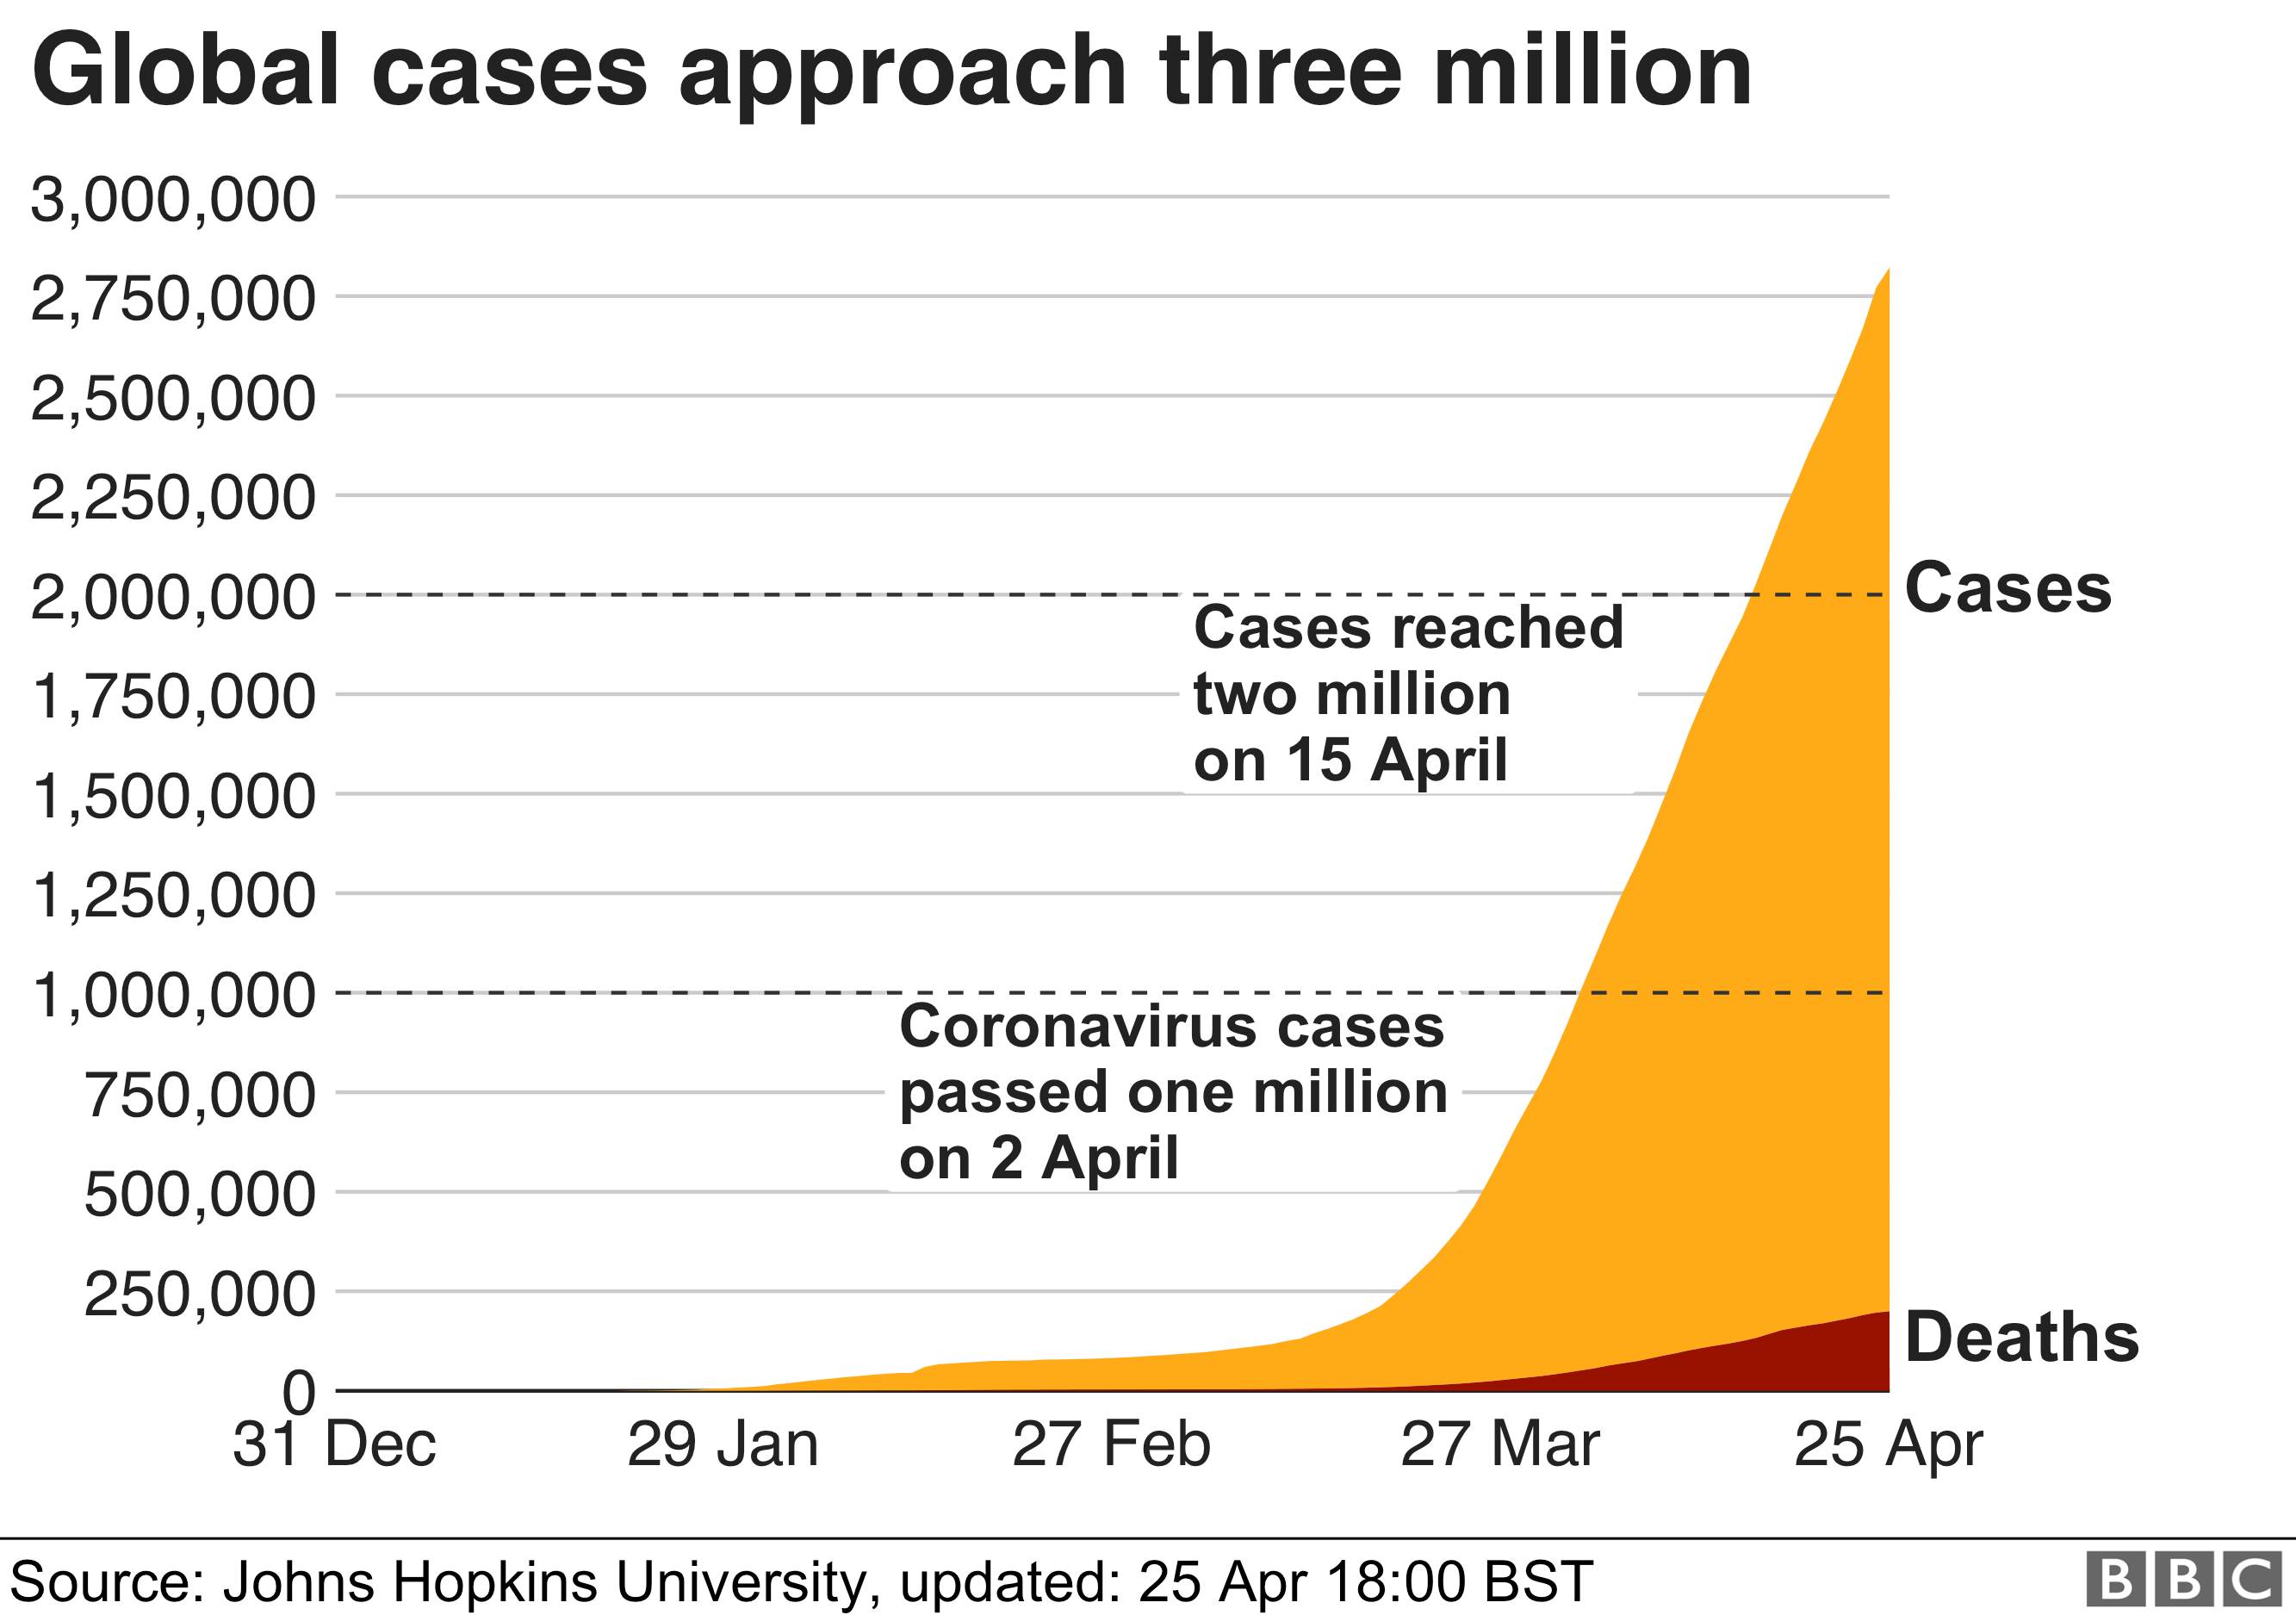 Area chart showing number of global cases is approaching 3m